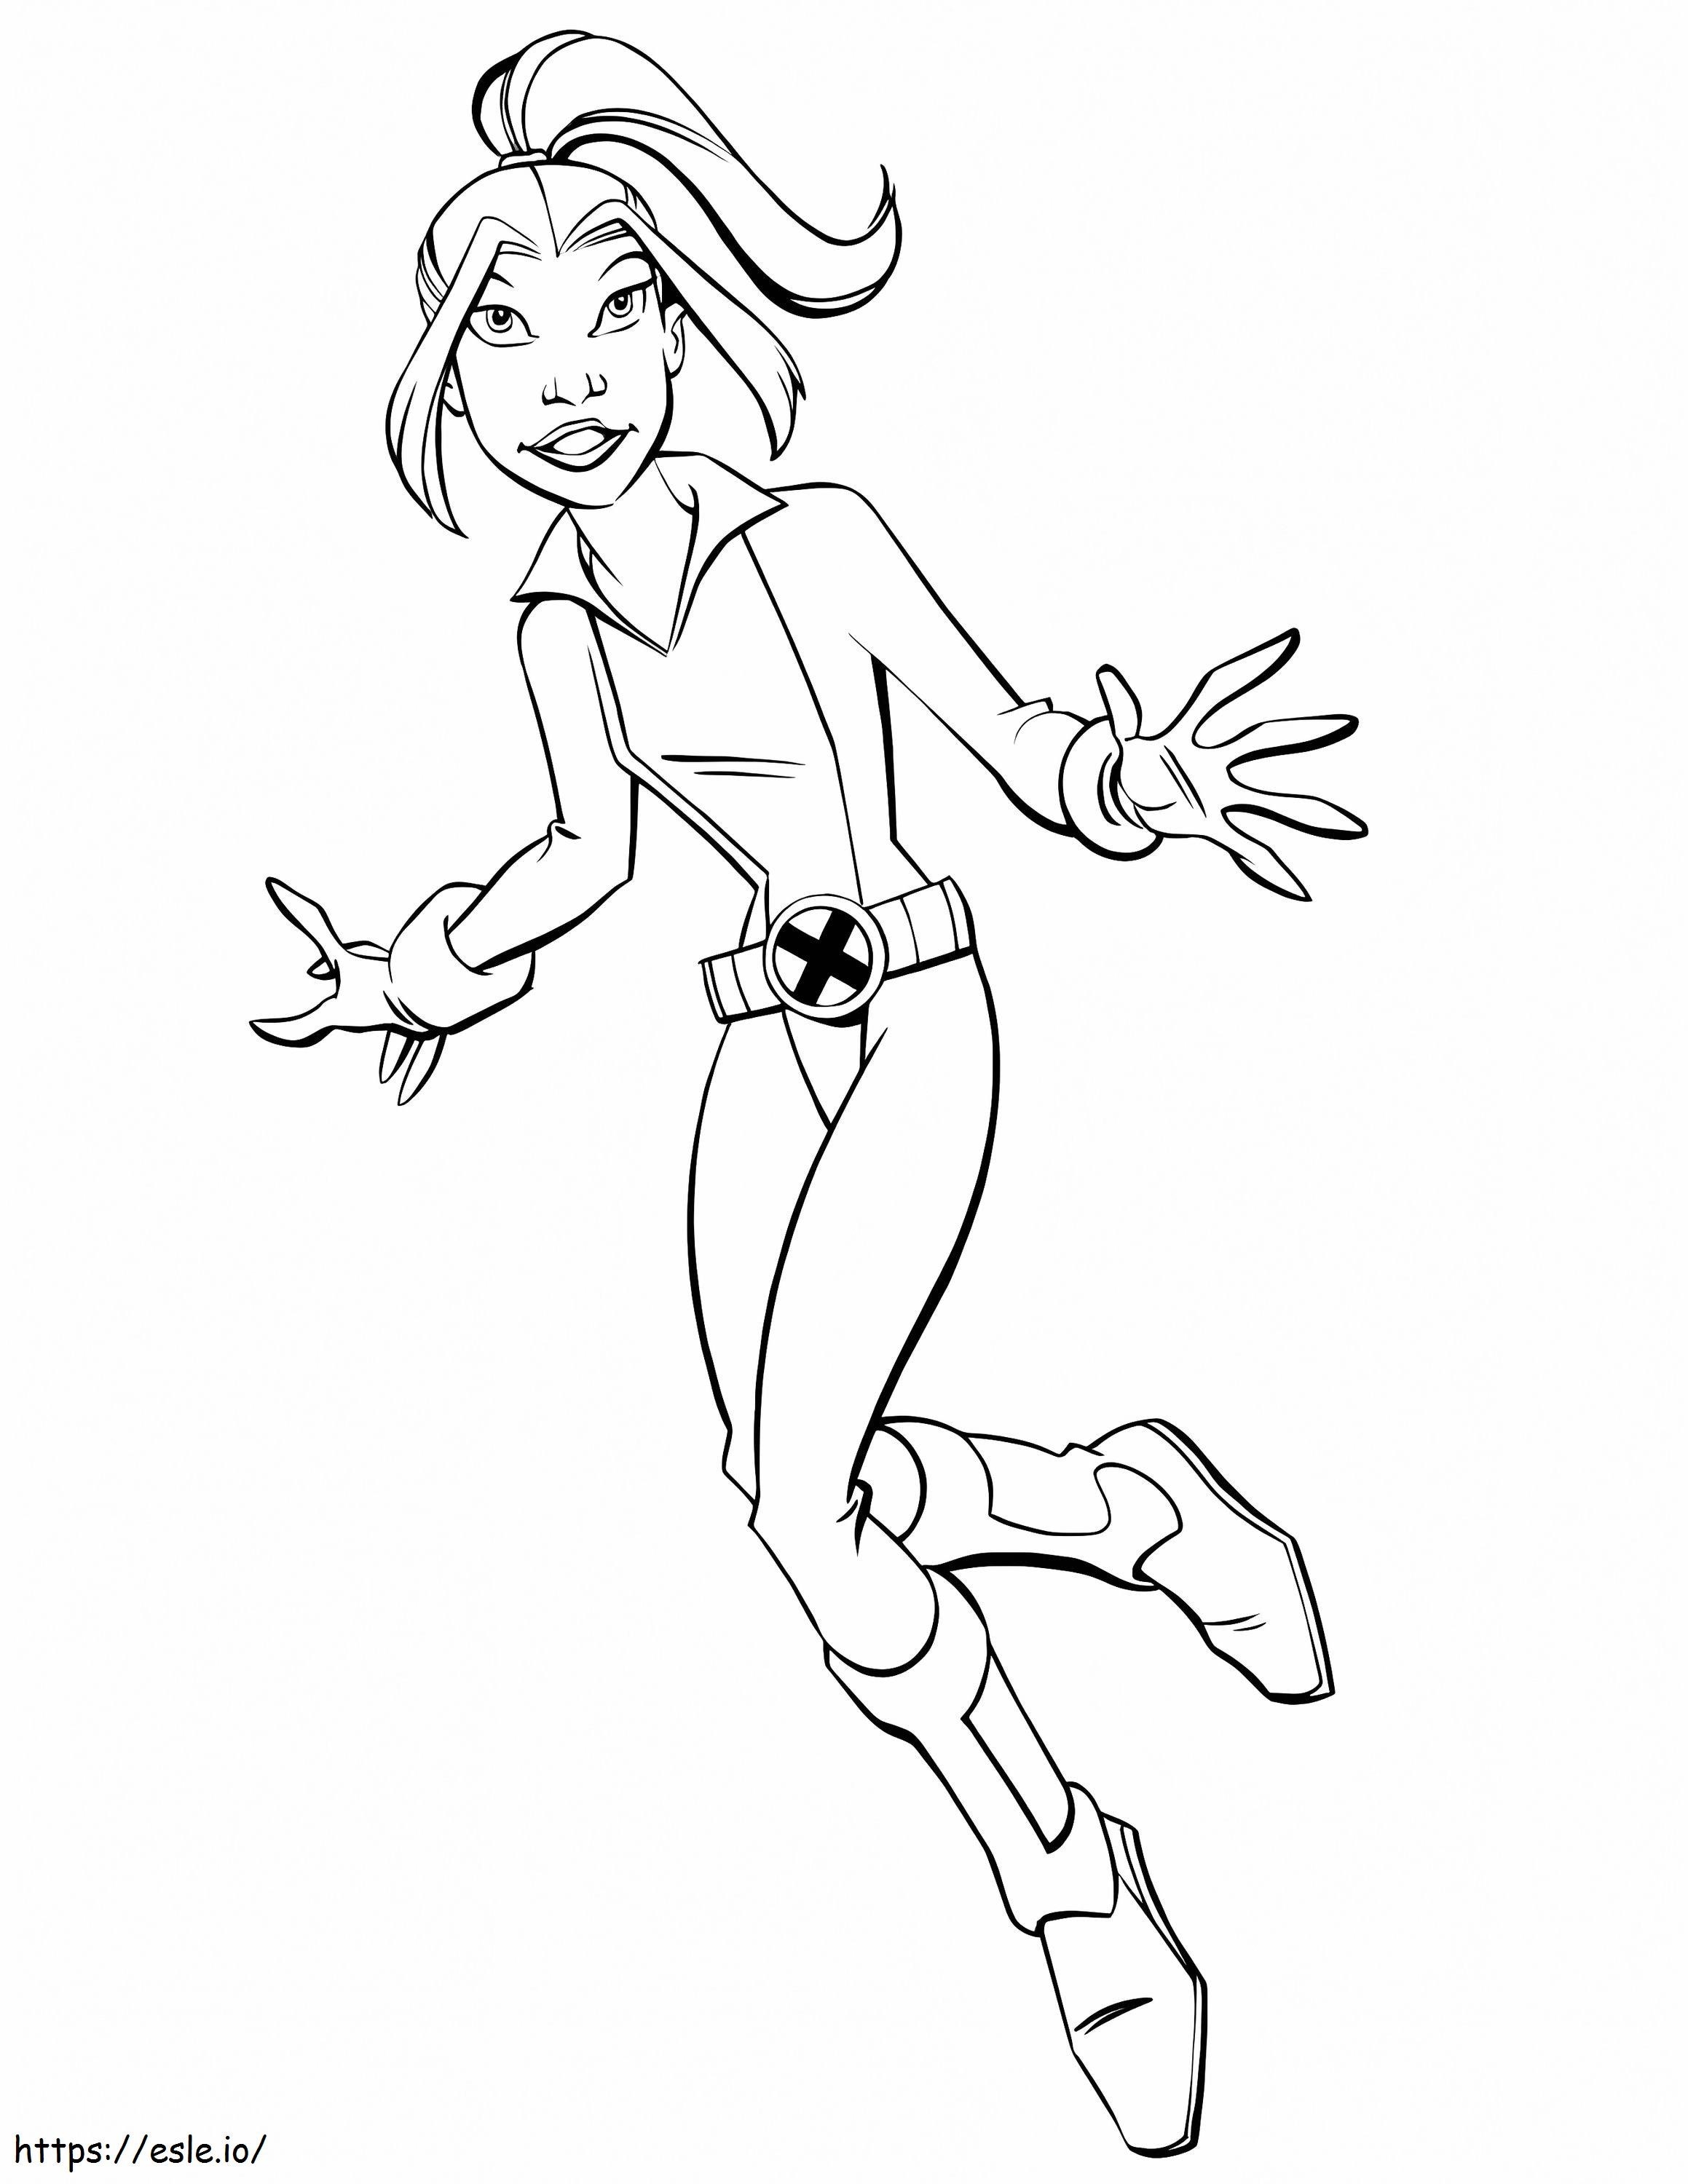 rogue coloring pages